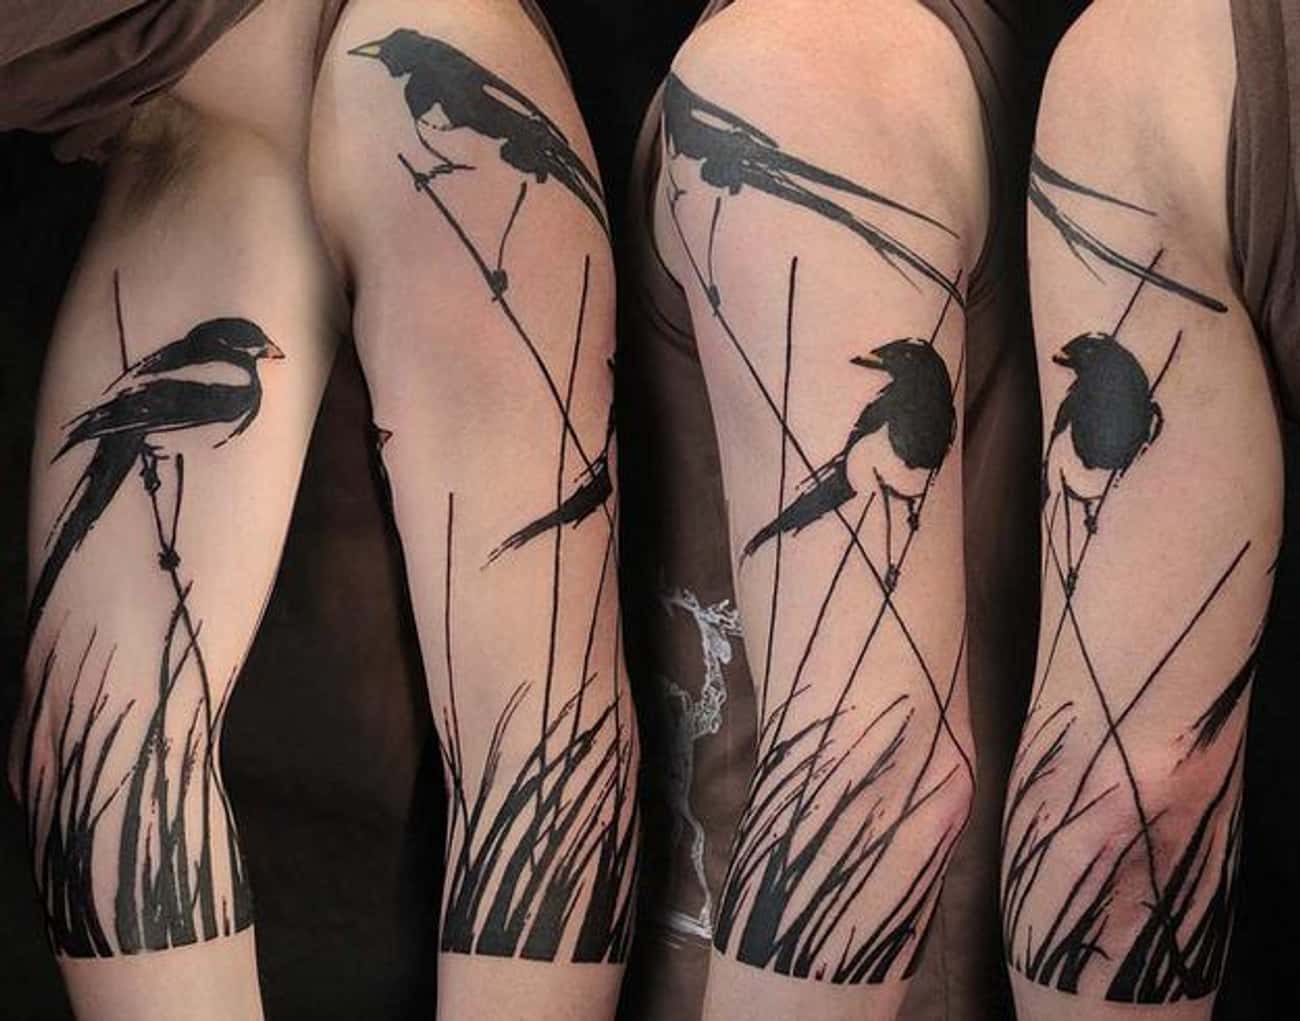 These Cute Little Birdies in Tall Grass